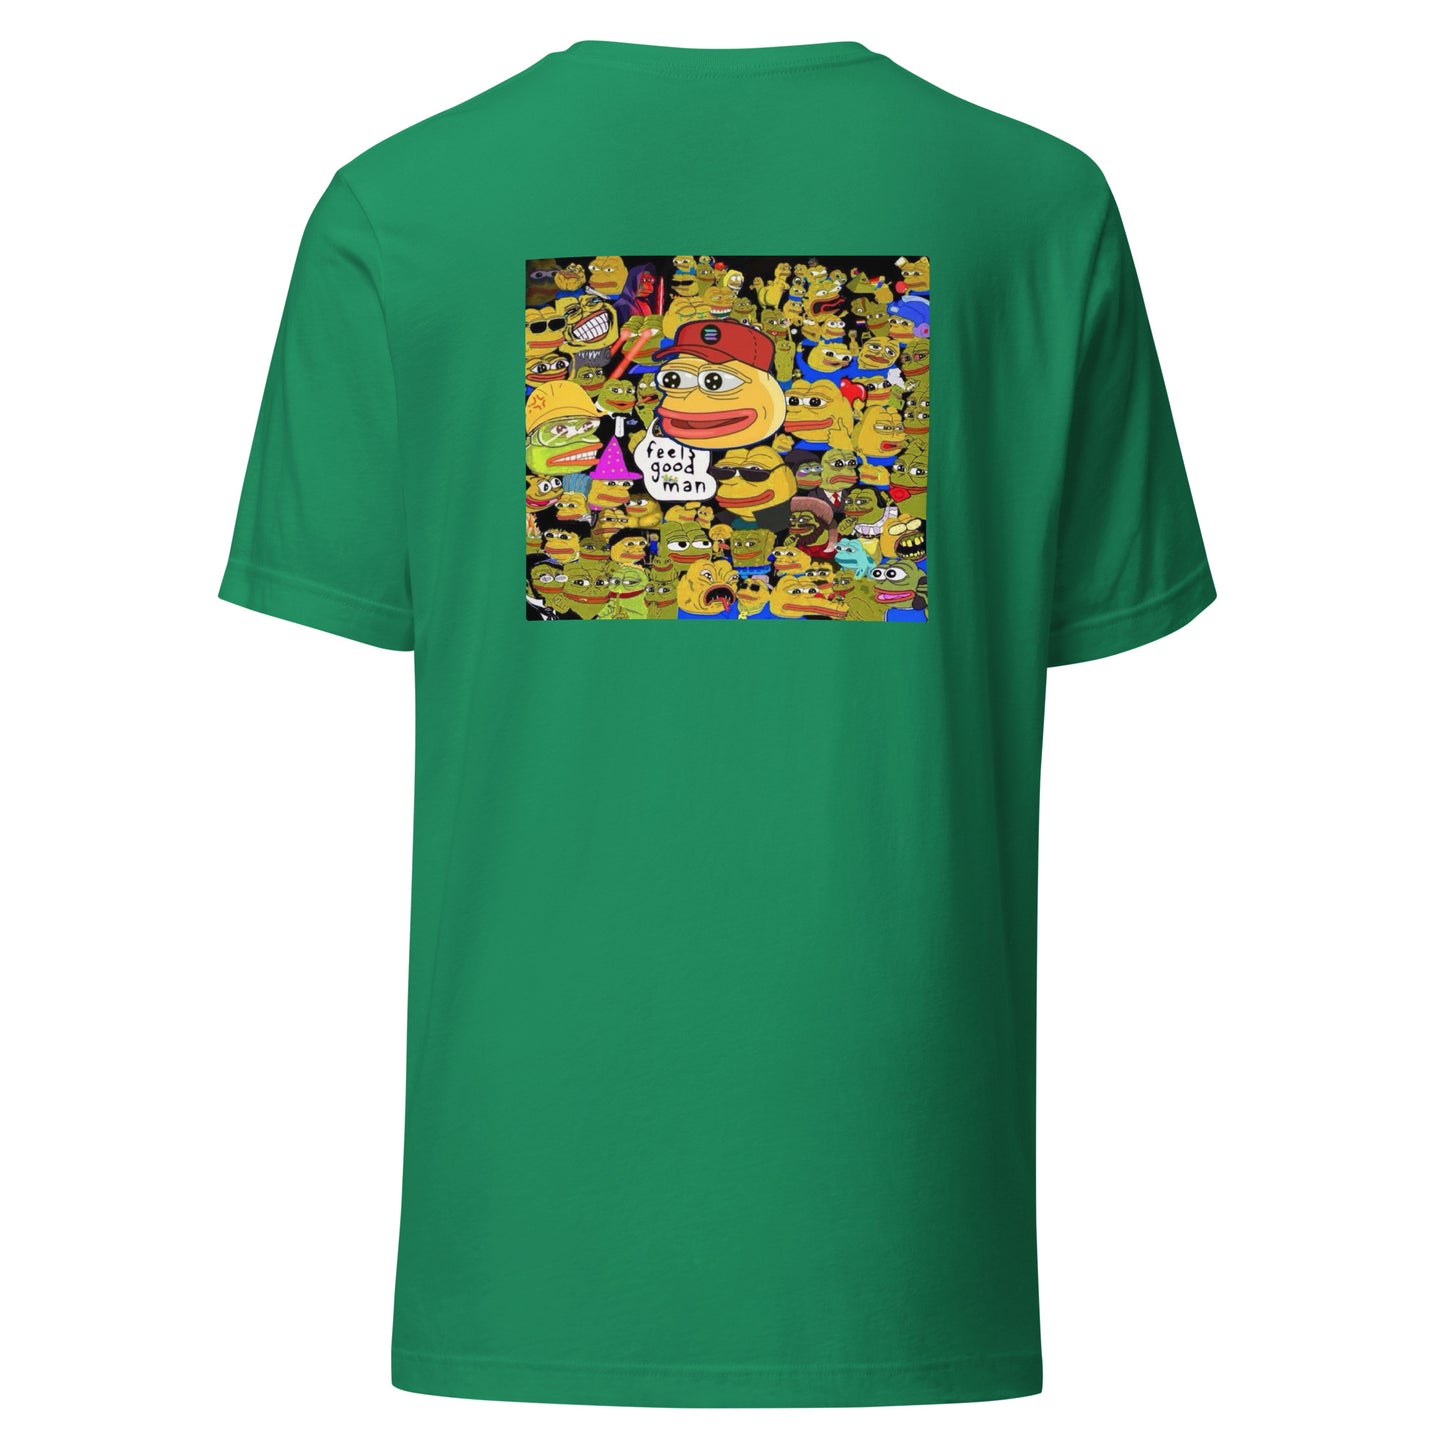 Pepe and friends on back t-shirt